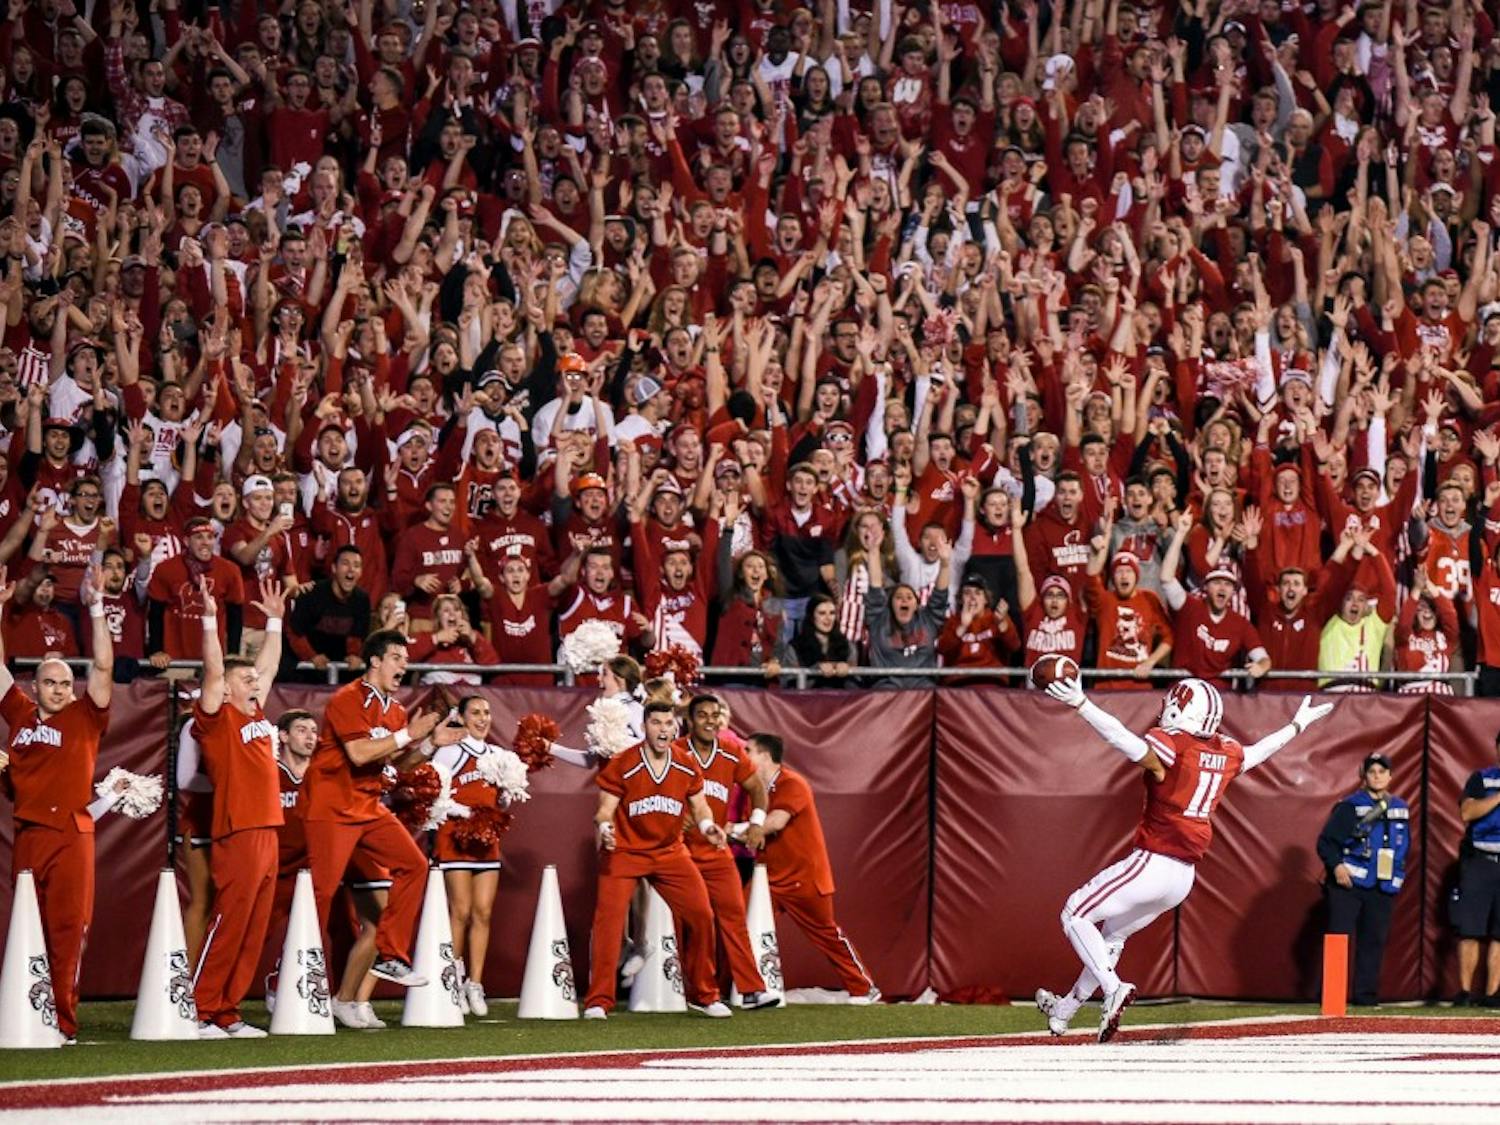 Gallery: Wisconsin vs. Ohio State under the lights